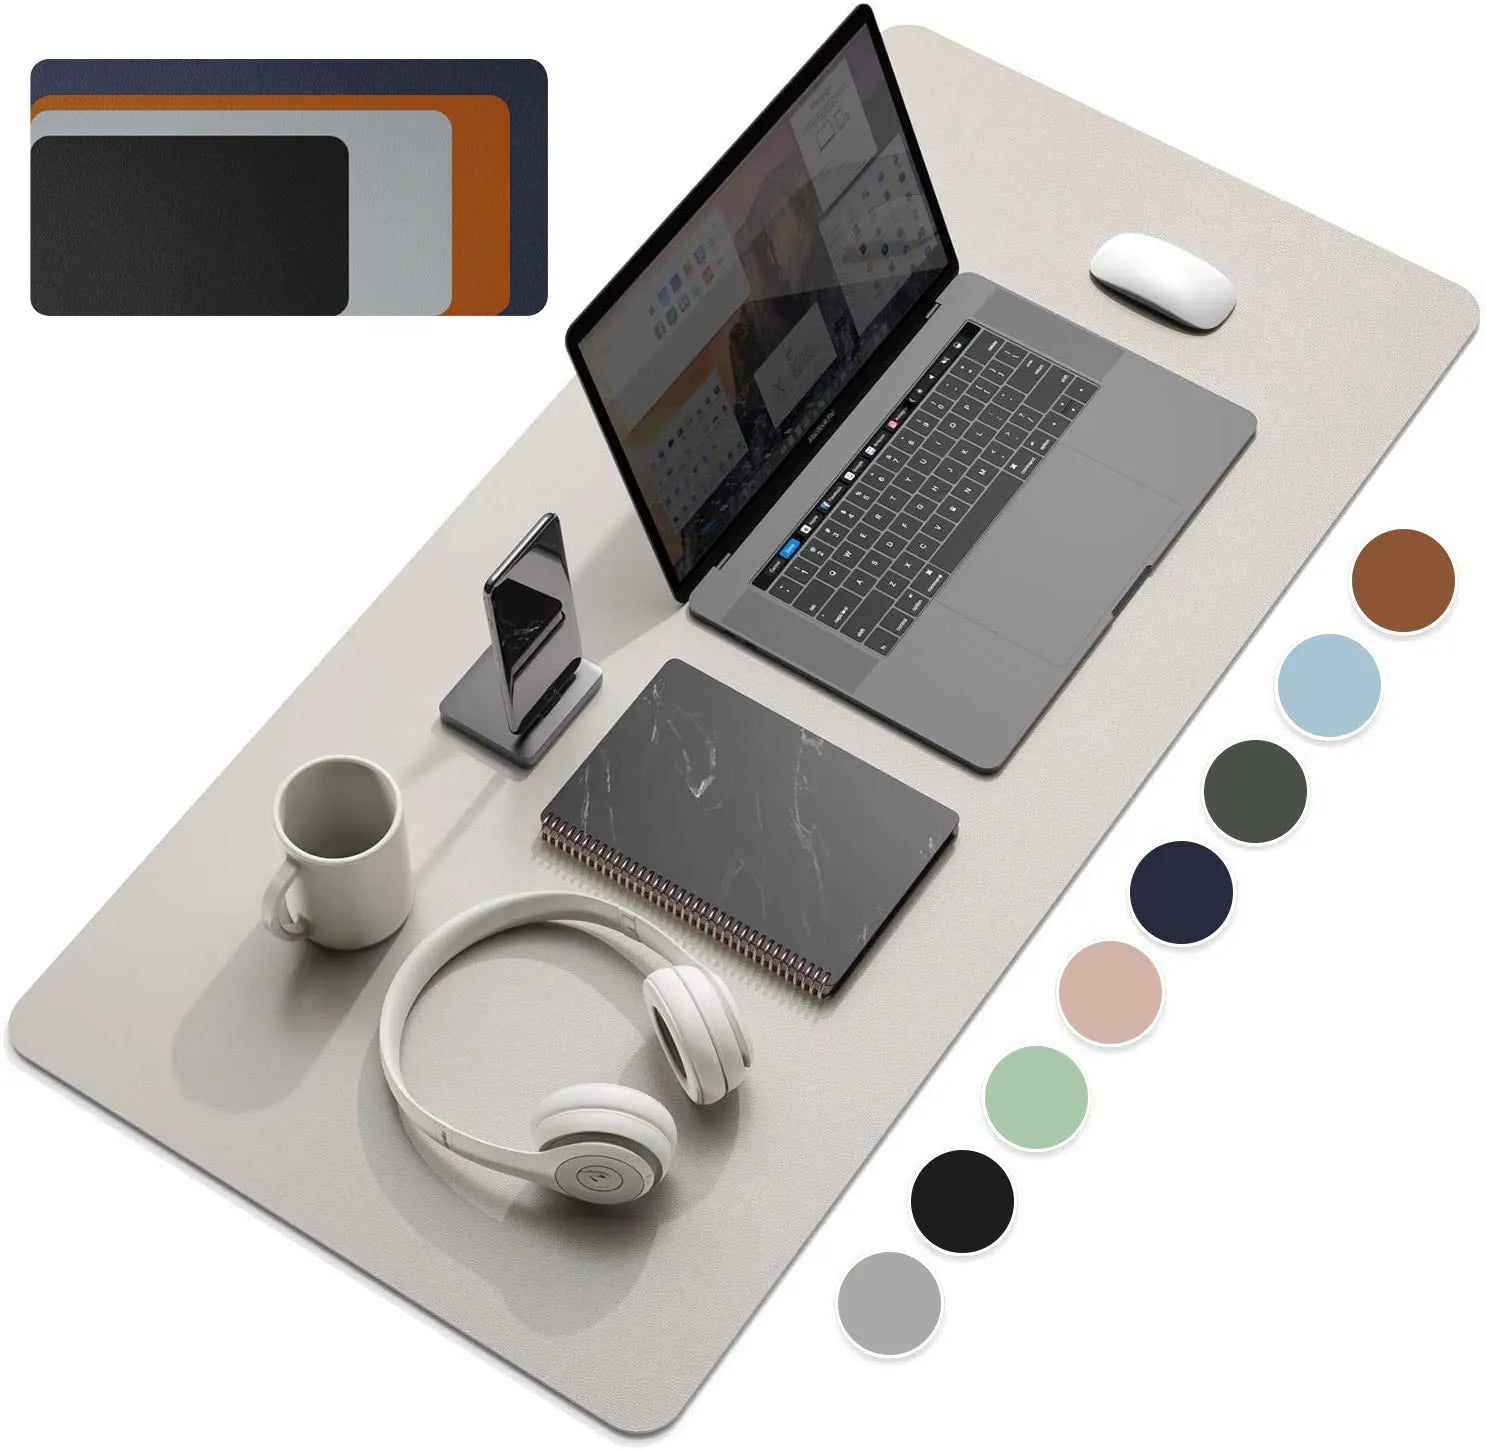 Large Size PU Leather Desk Protector - Waterproof Mousepad